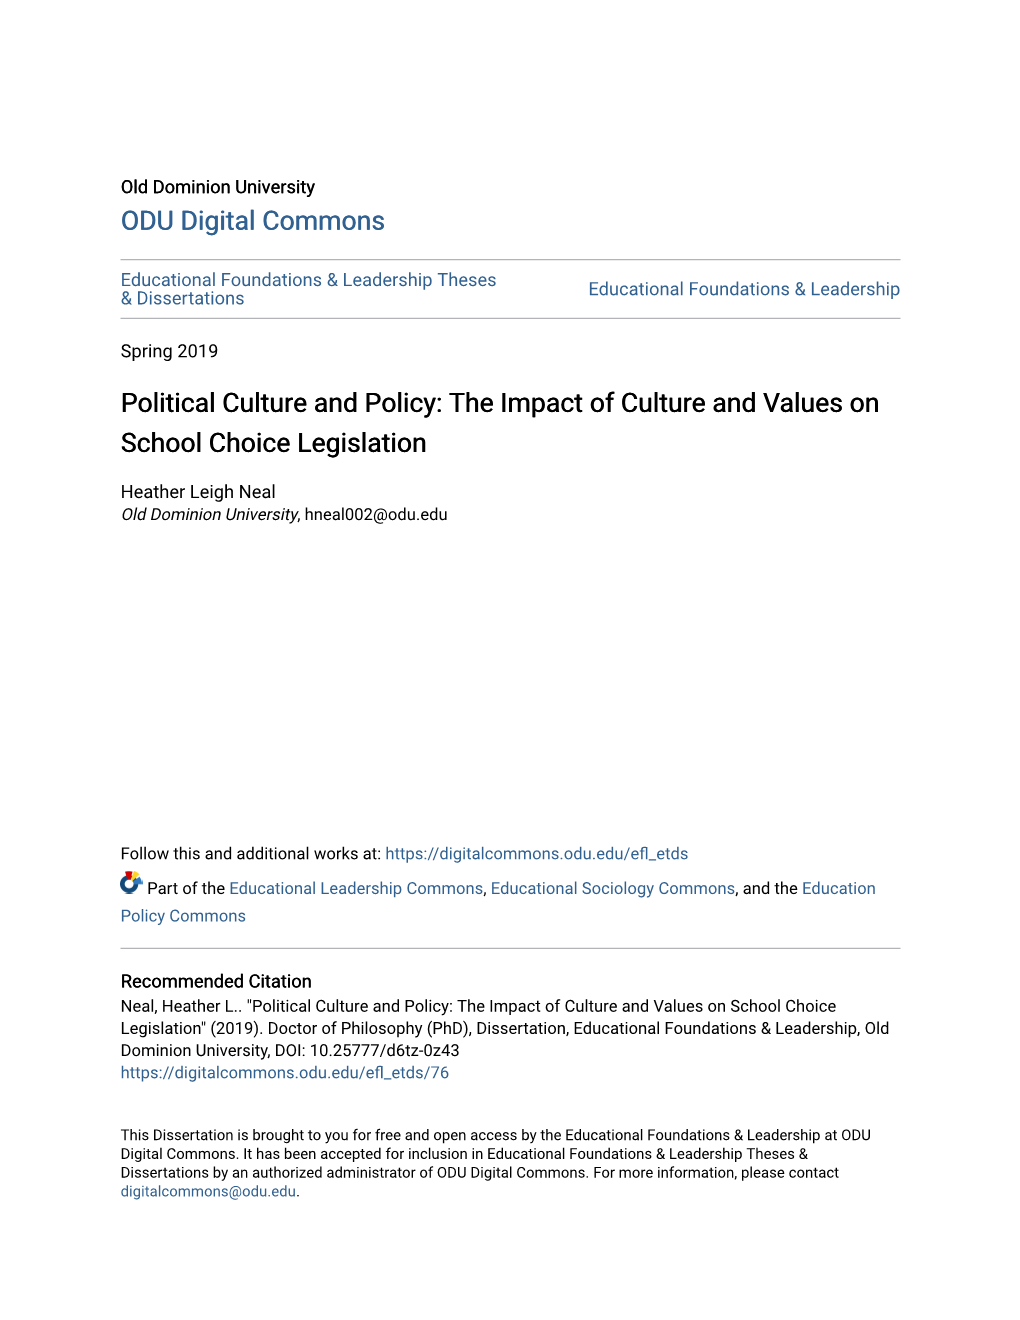 The Impact of Culture and Values on School Choice Legislation